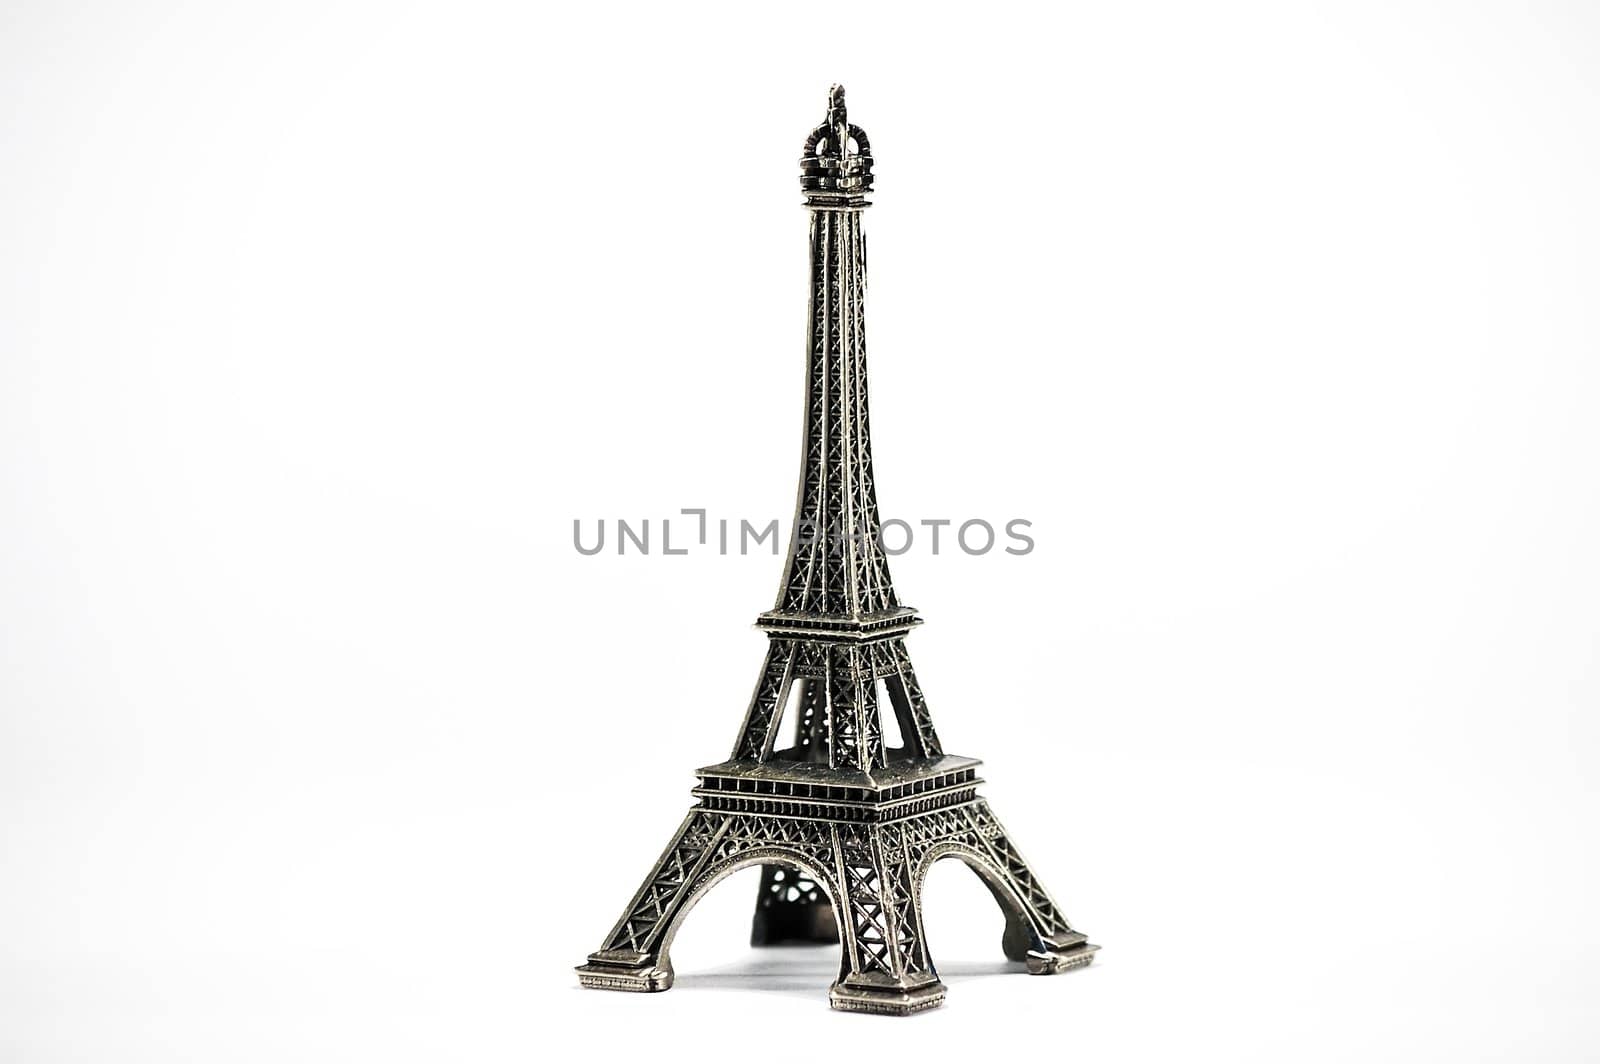 picture of souvenir of copying Eiffel tower in Paris